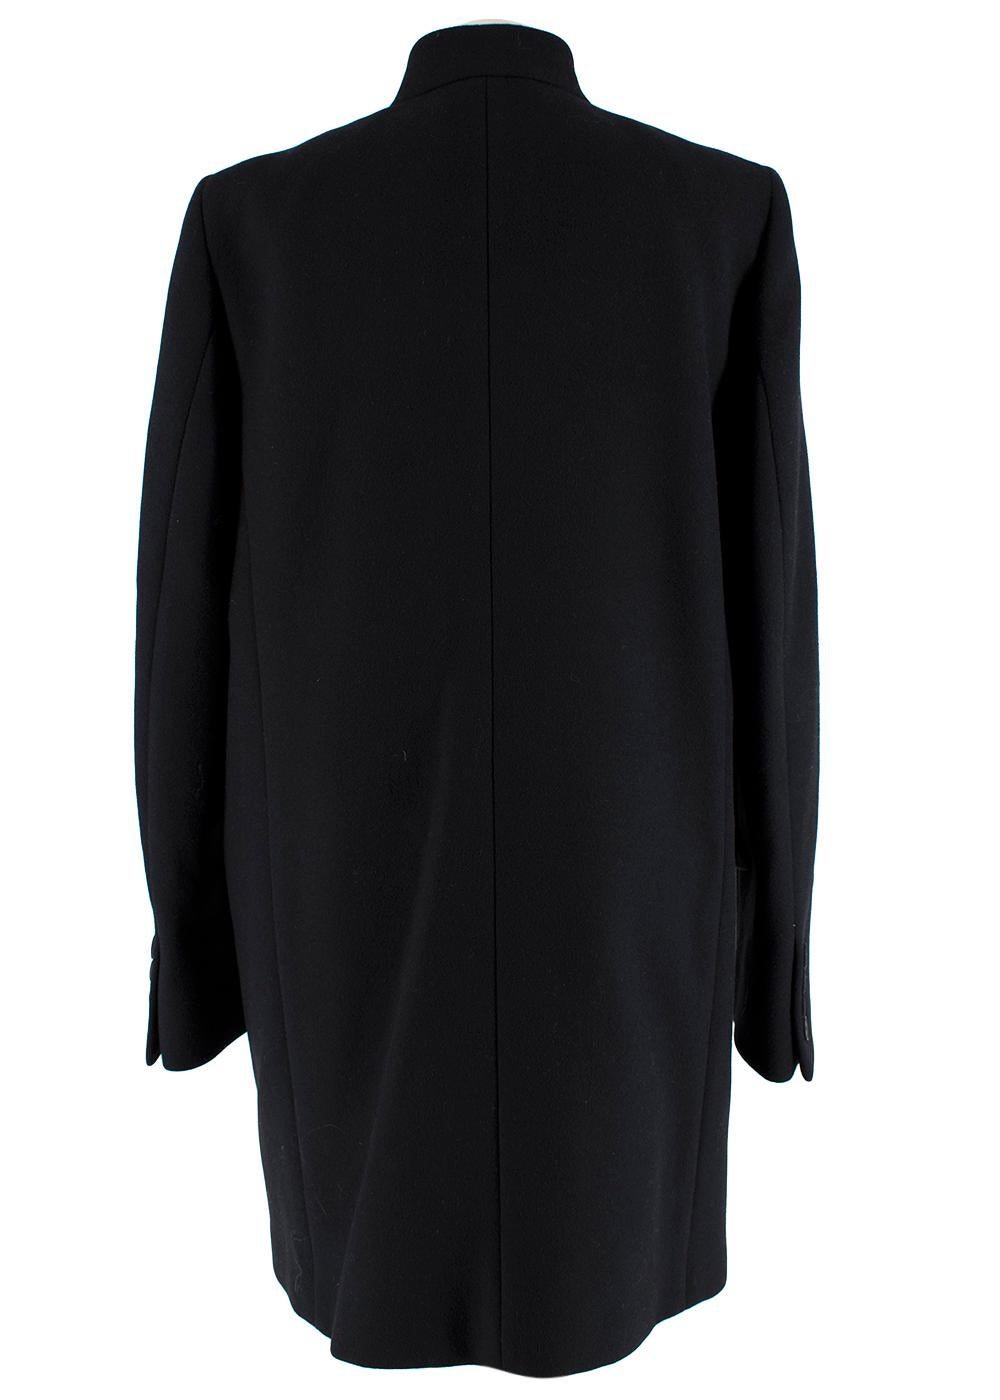 Stella McCartney Black Wool Blend Single-breasted Coat with Flat Colar

-Modern take on a classic style 
-Single-breasted design
-luxurious soft wool texture 
-Trompe l'oeil flat colar
-2 outer pockets 
-Fully lined with a soft fabric for extra